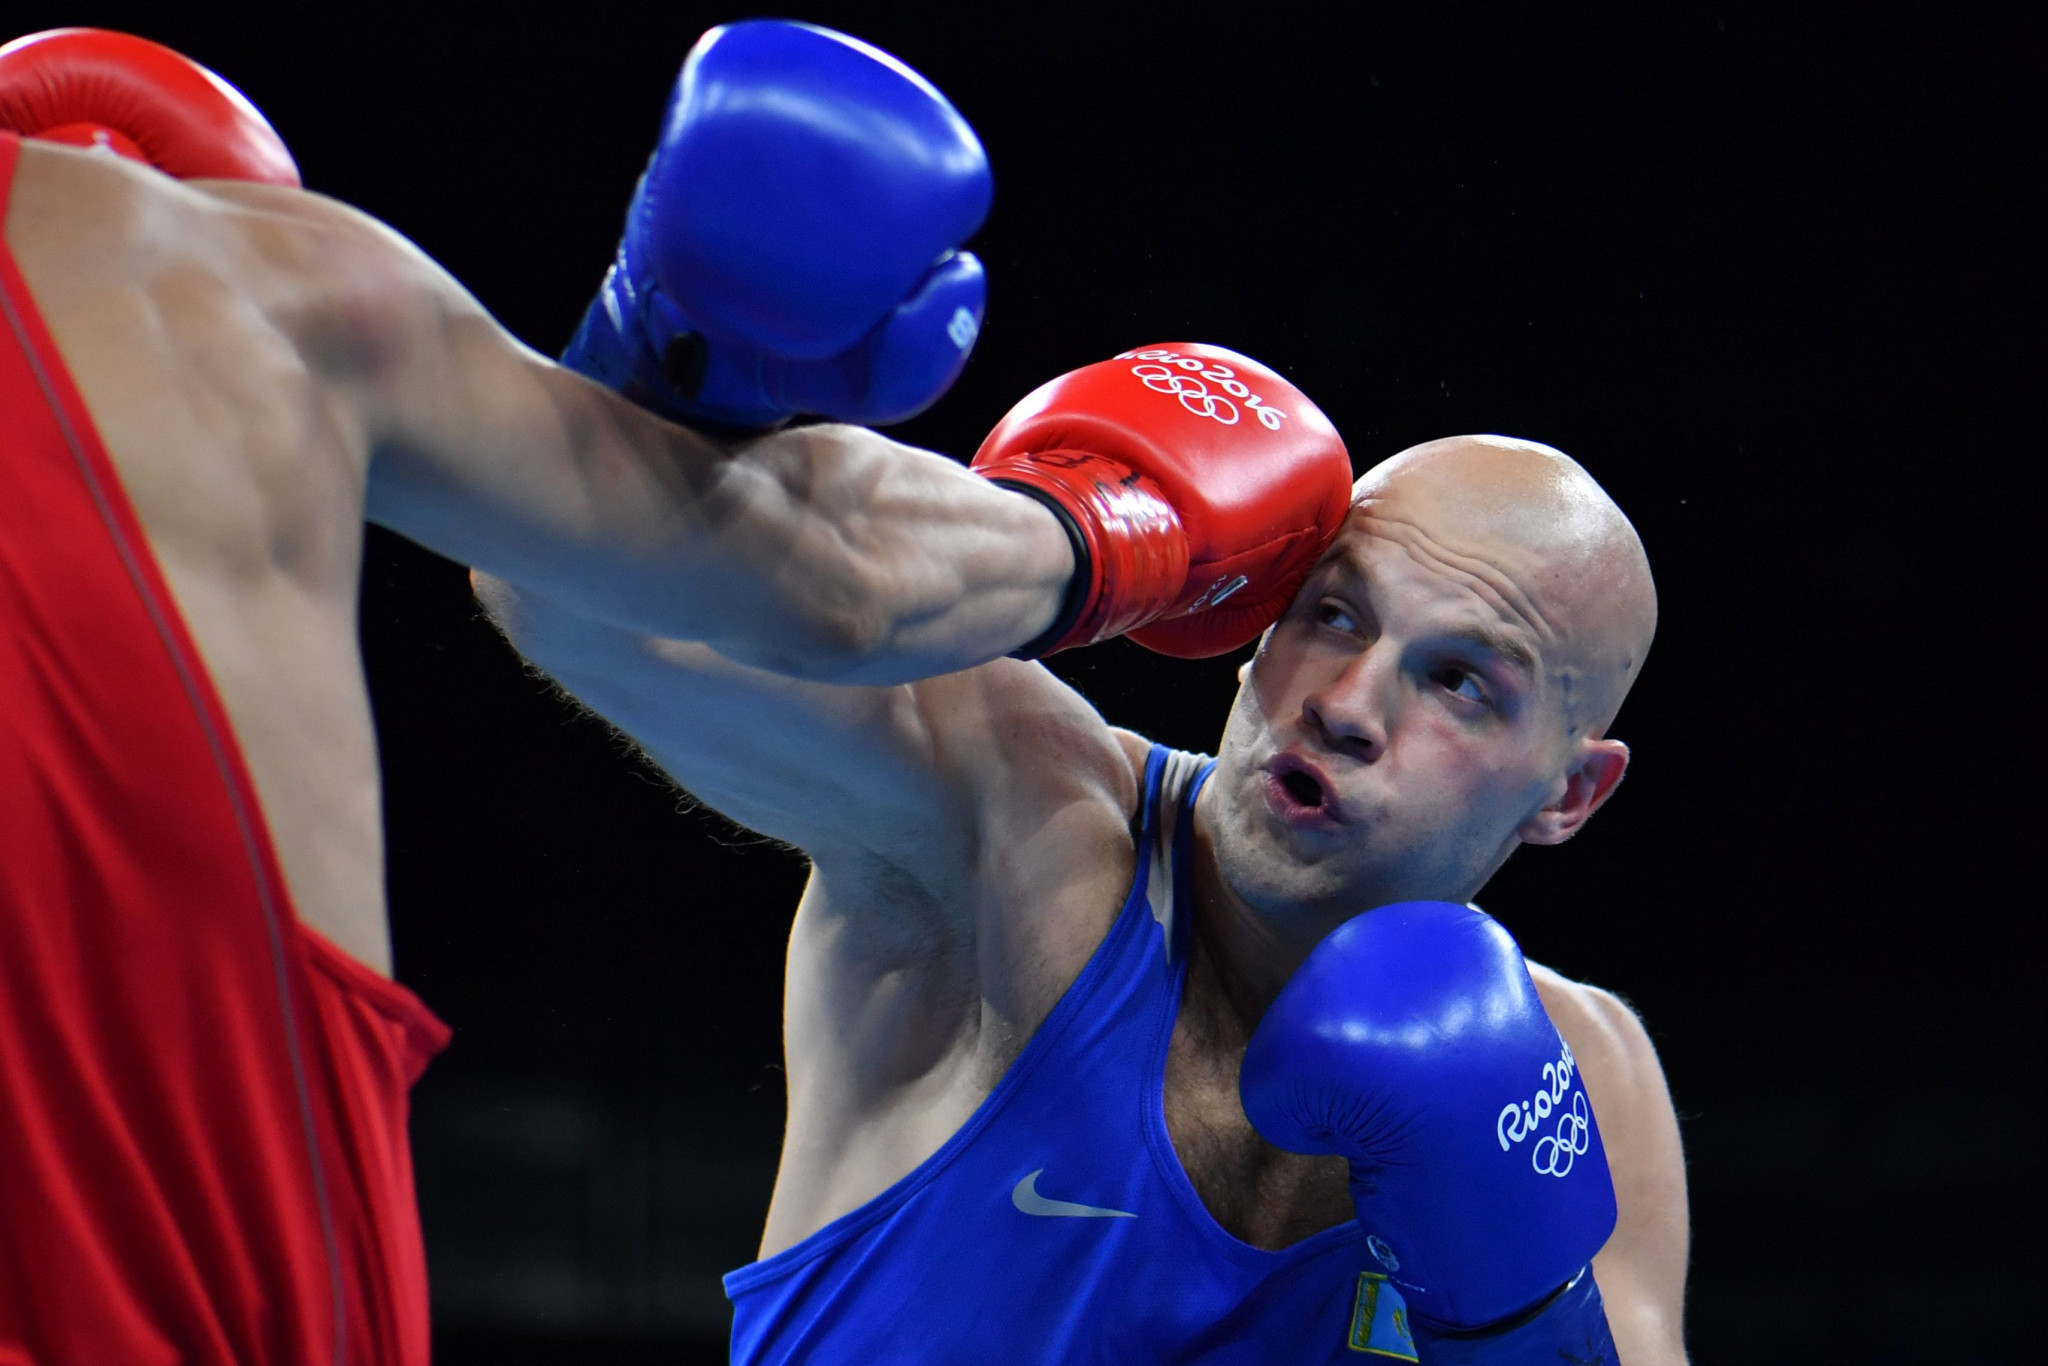 Kazakhstan's Olympic boxers will participate in training camps in the US and Cuba ©Getty Images